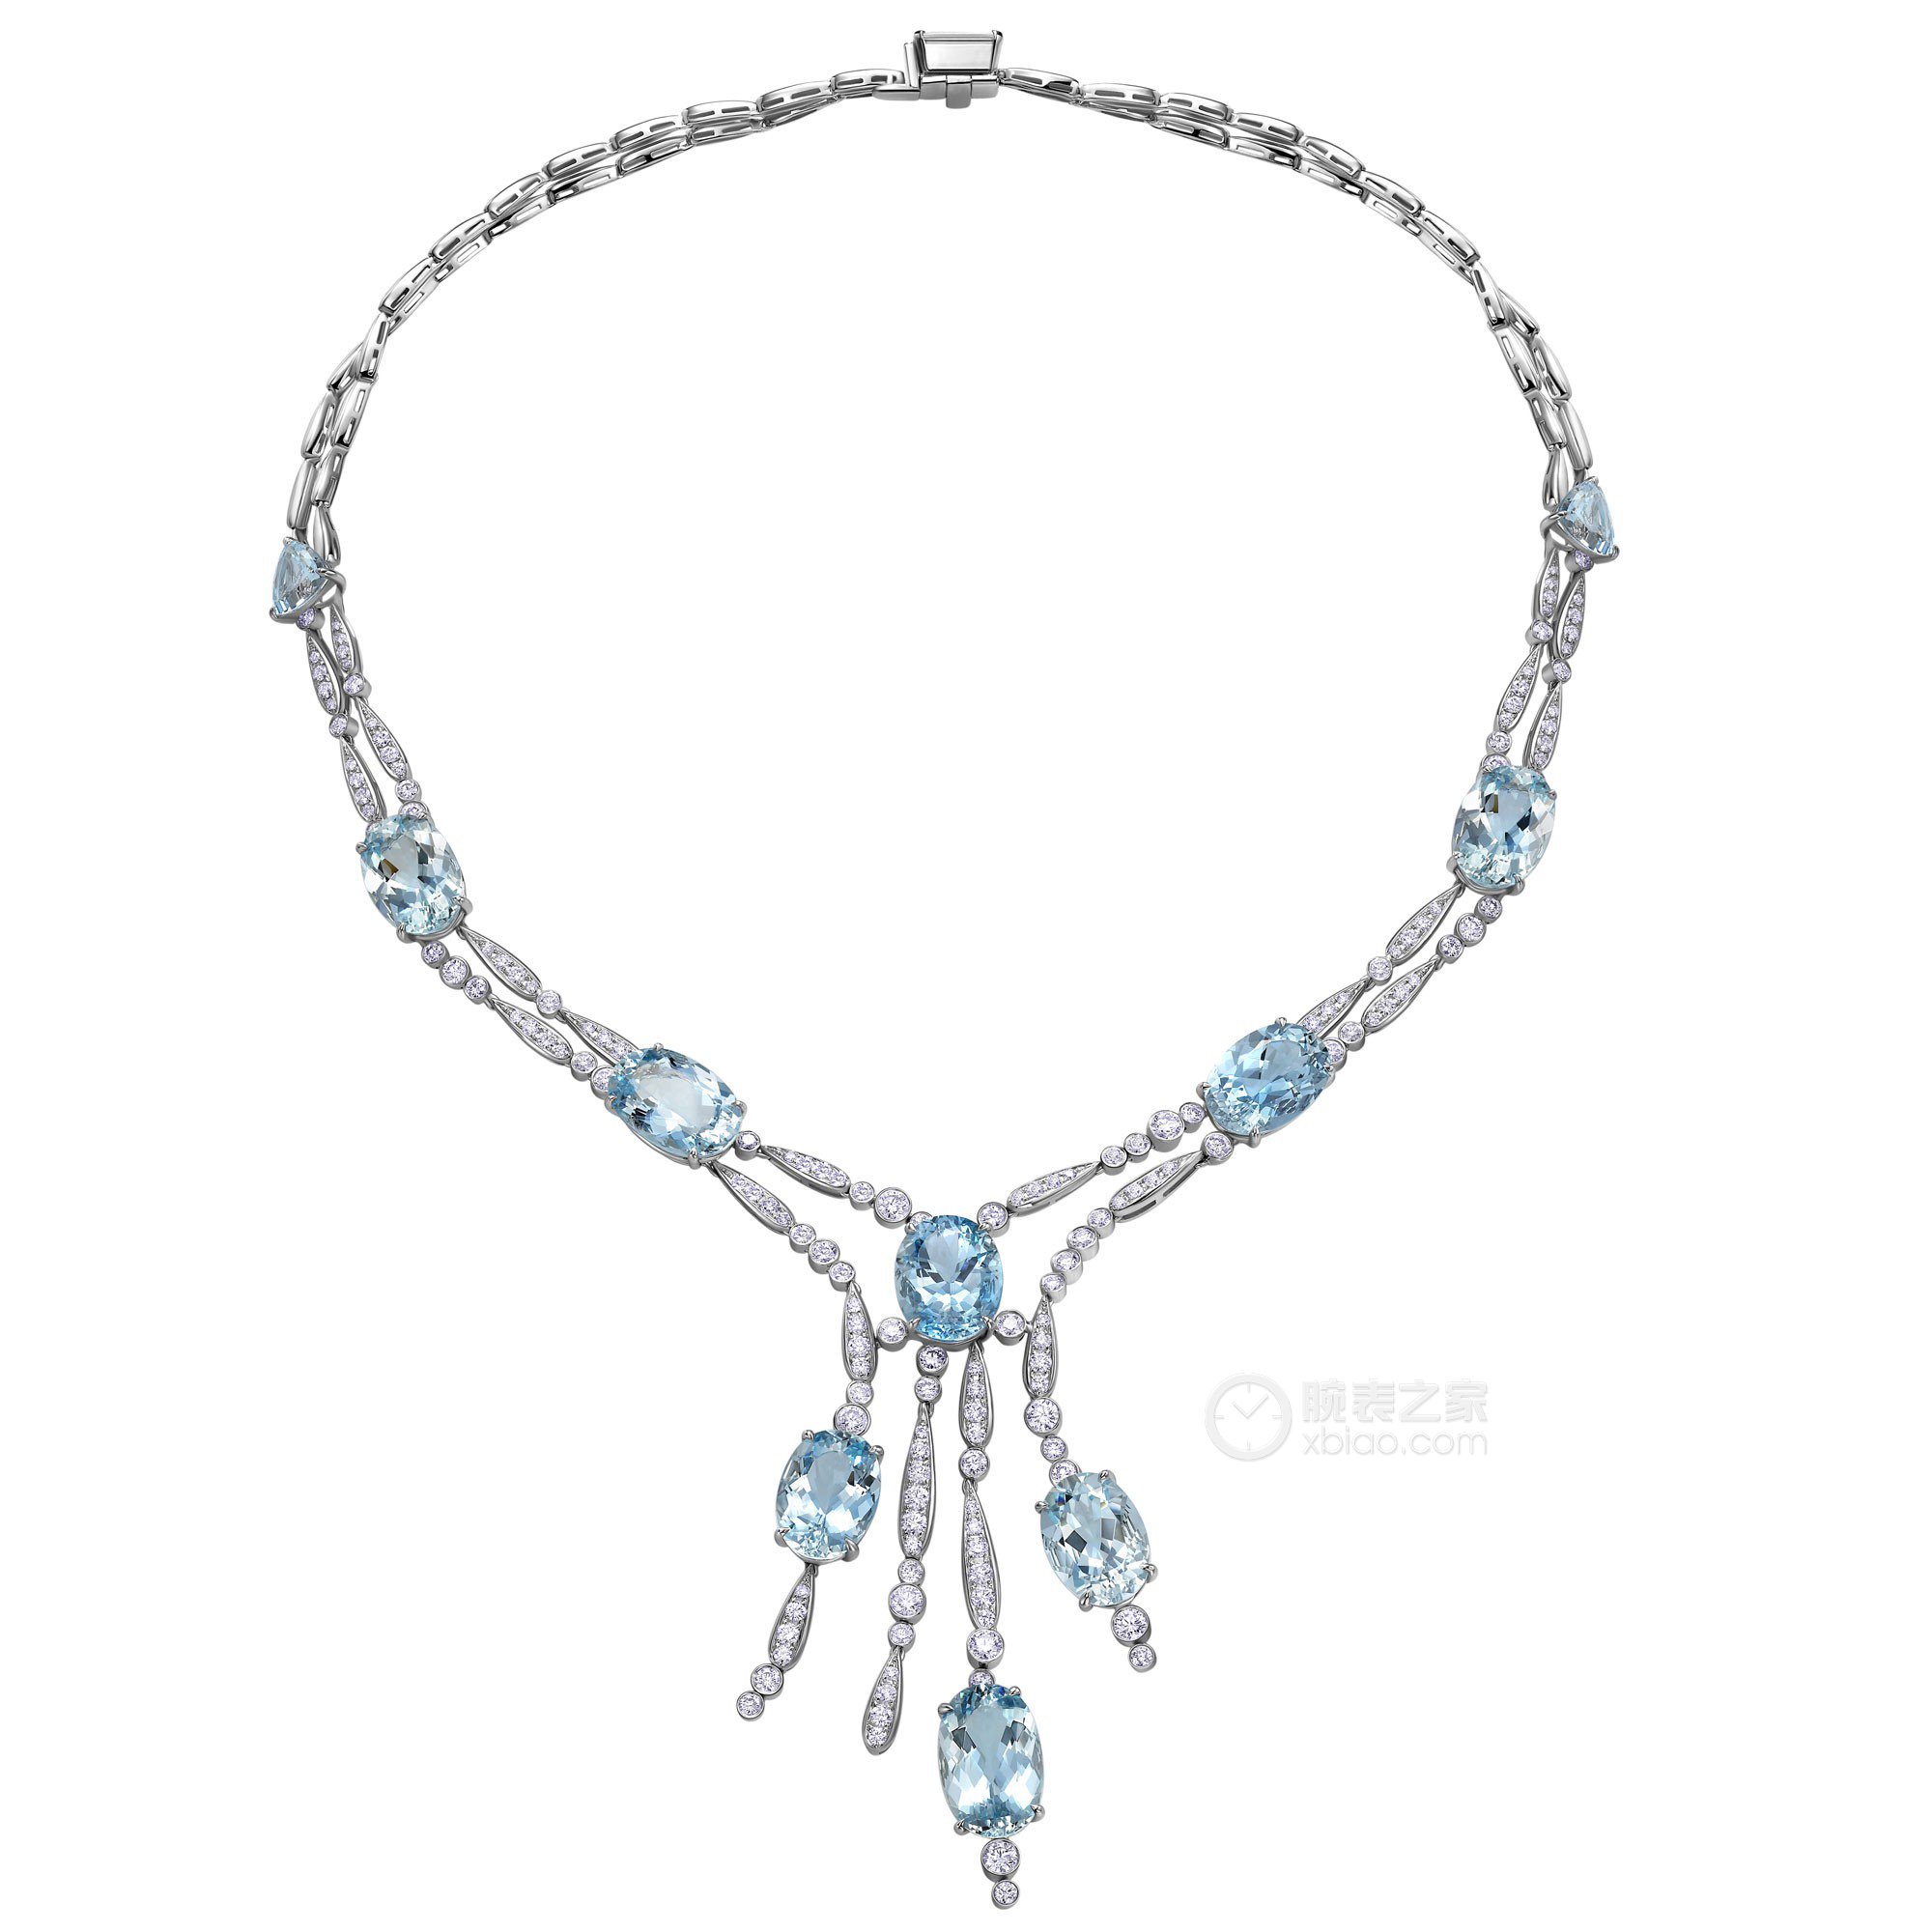 Tiffany & Co present Legacy collection | The Jewellery Editor